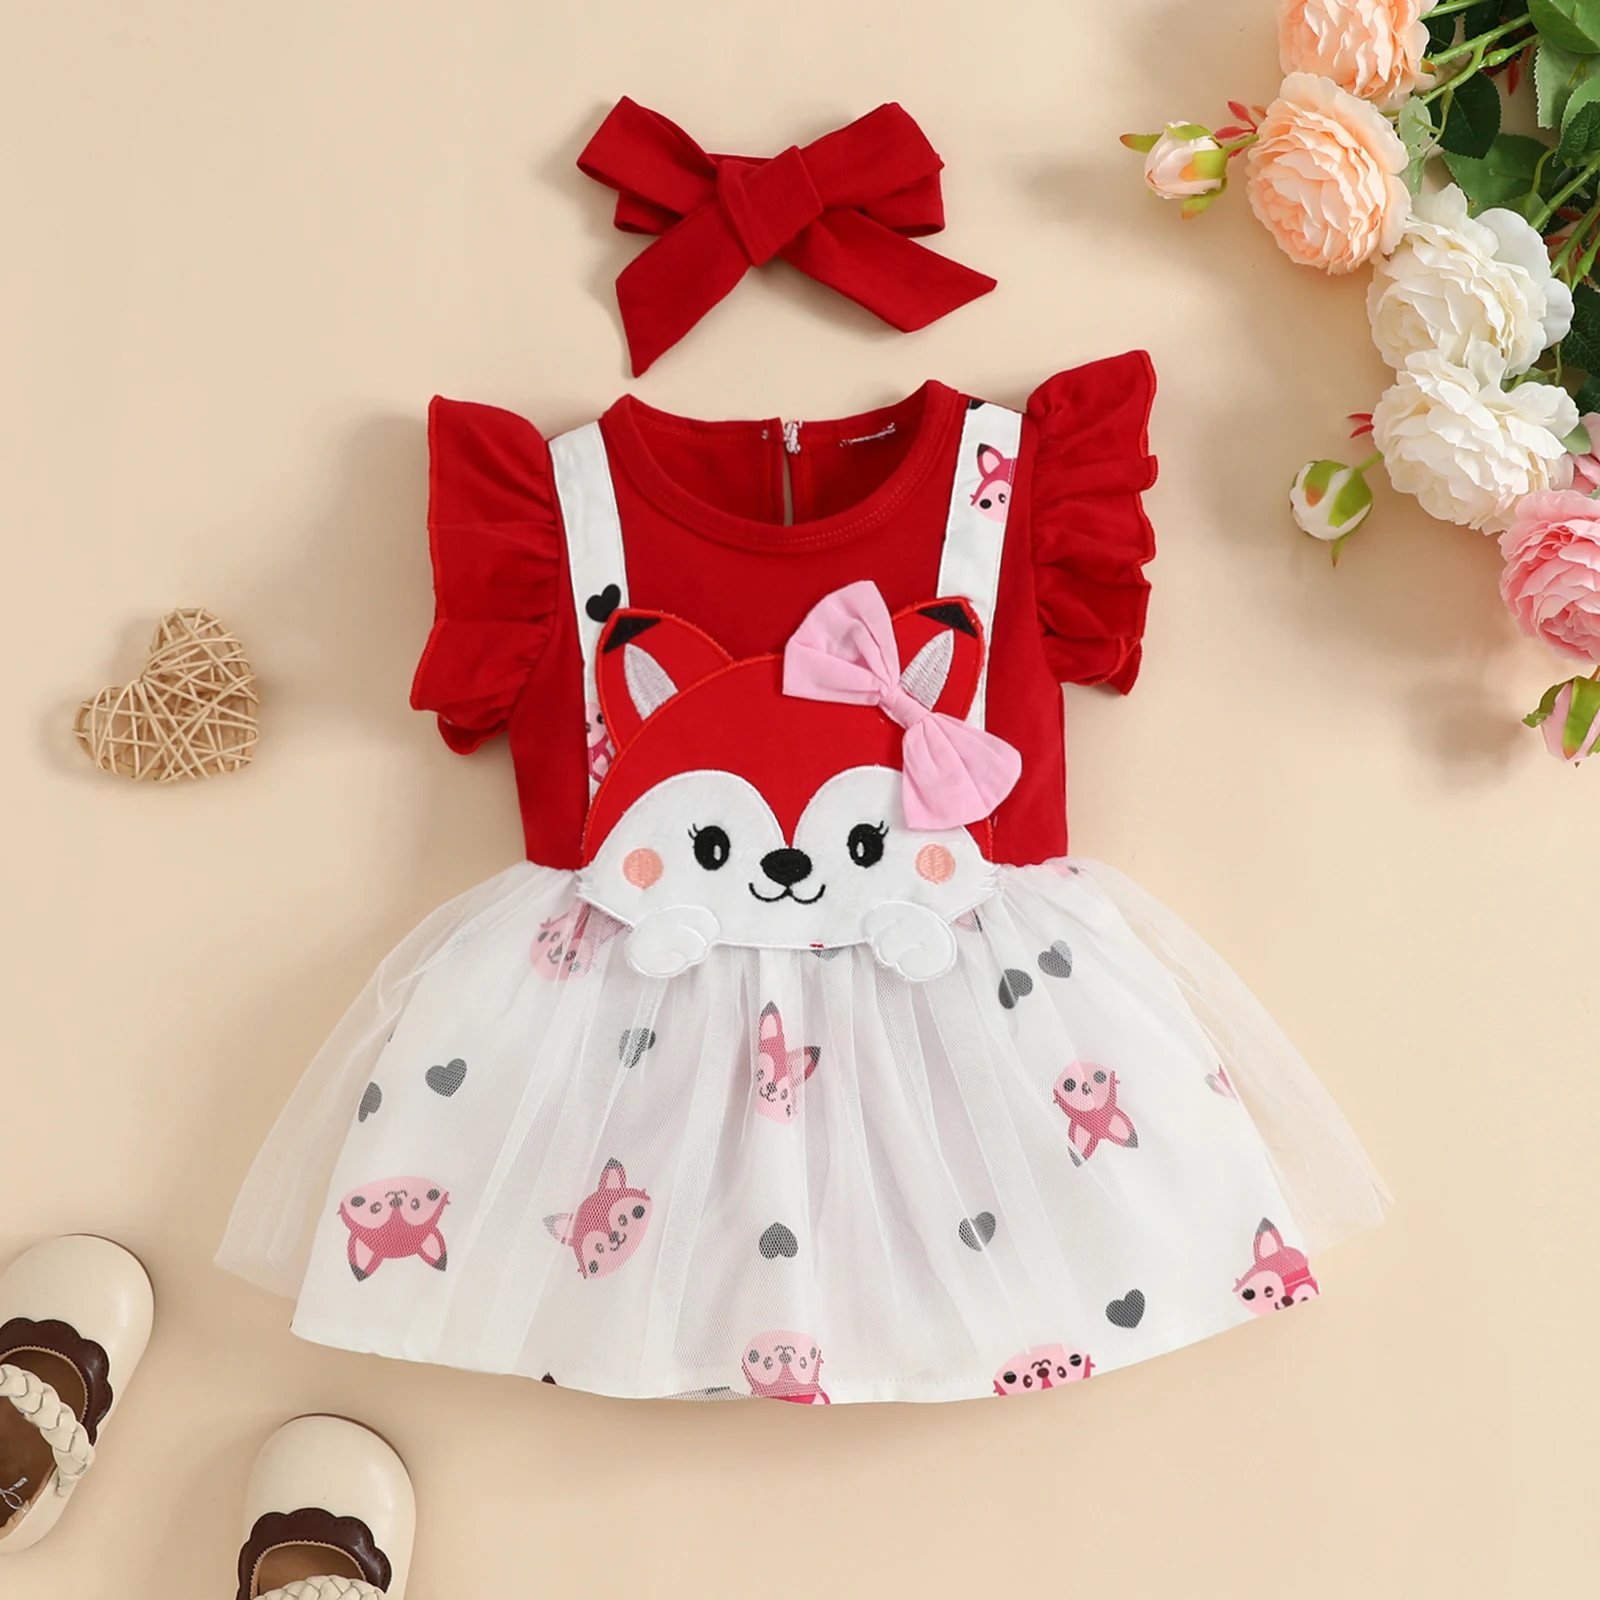 2Pcs New Baby Girls Lovely Romper Set Toddle Fly Sleeve Crew Neck Cartoon Fox Tulle A-line Dress with Headband Suits